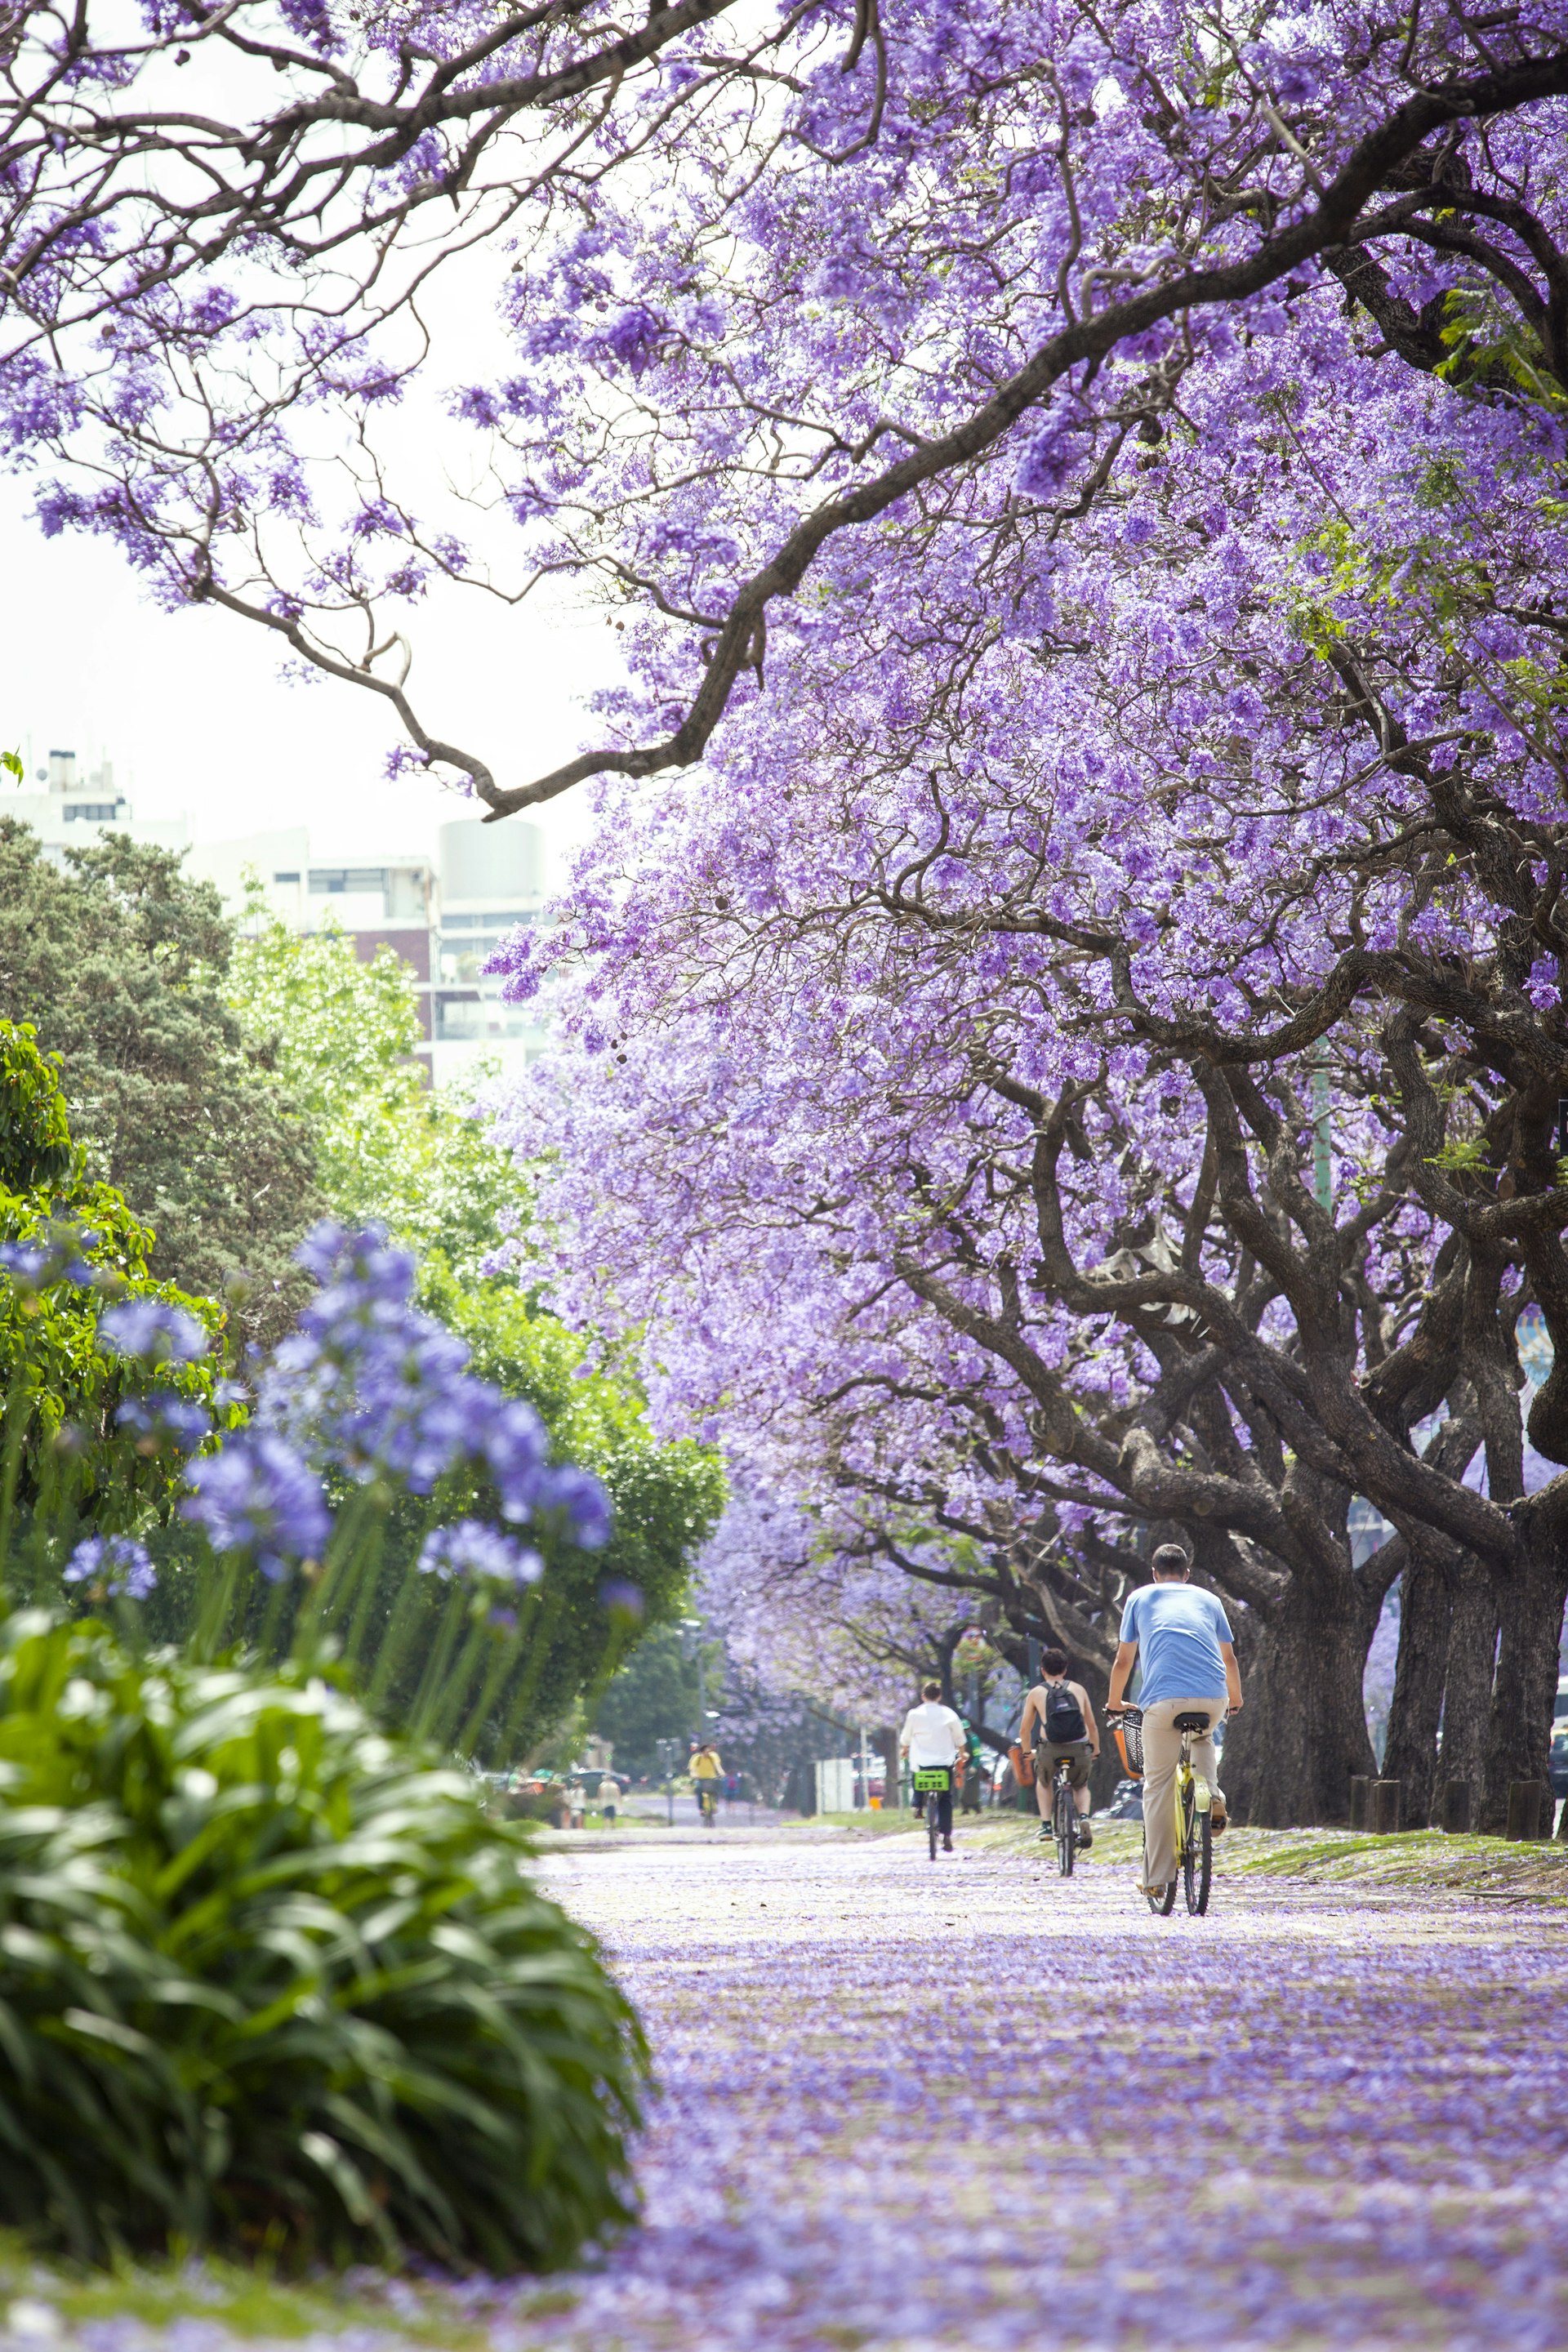 Cyclists ride along a path through parkland lined with jacaranda trees in bloom with purple flowers